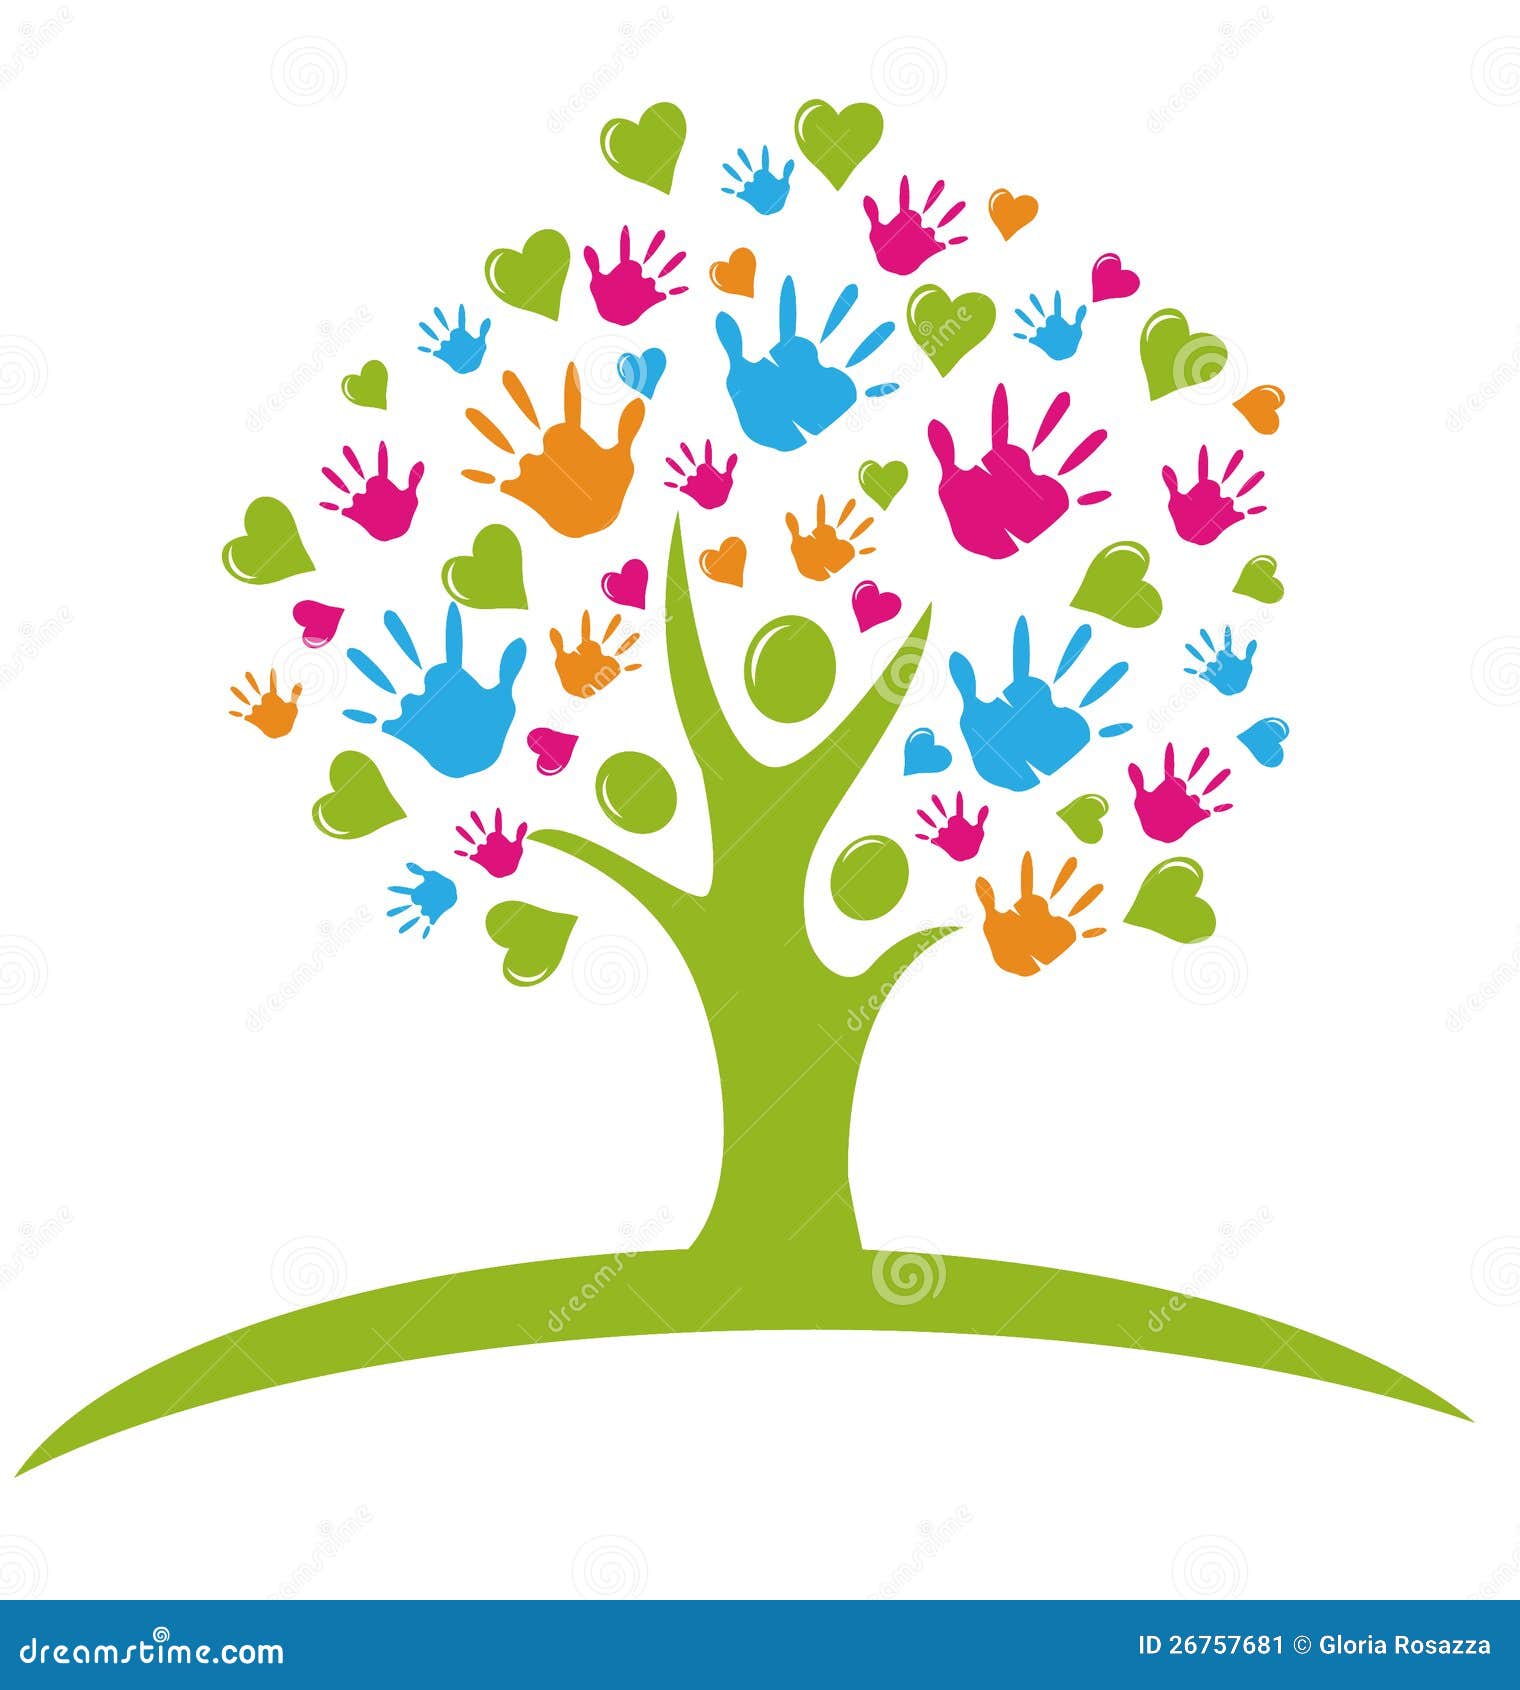 tree with hands and hearts logo